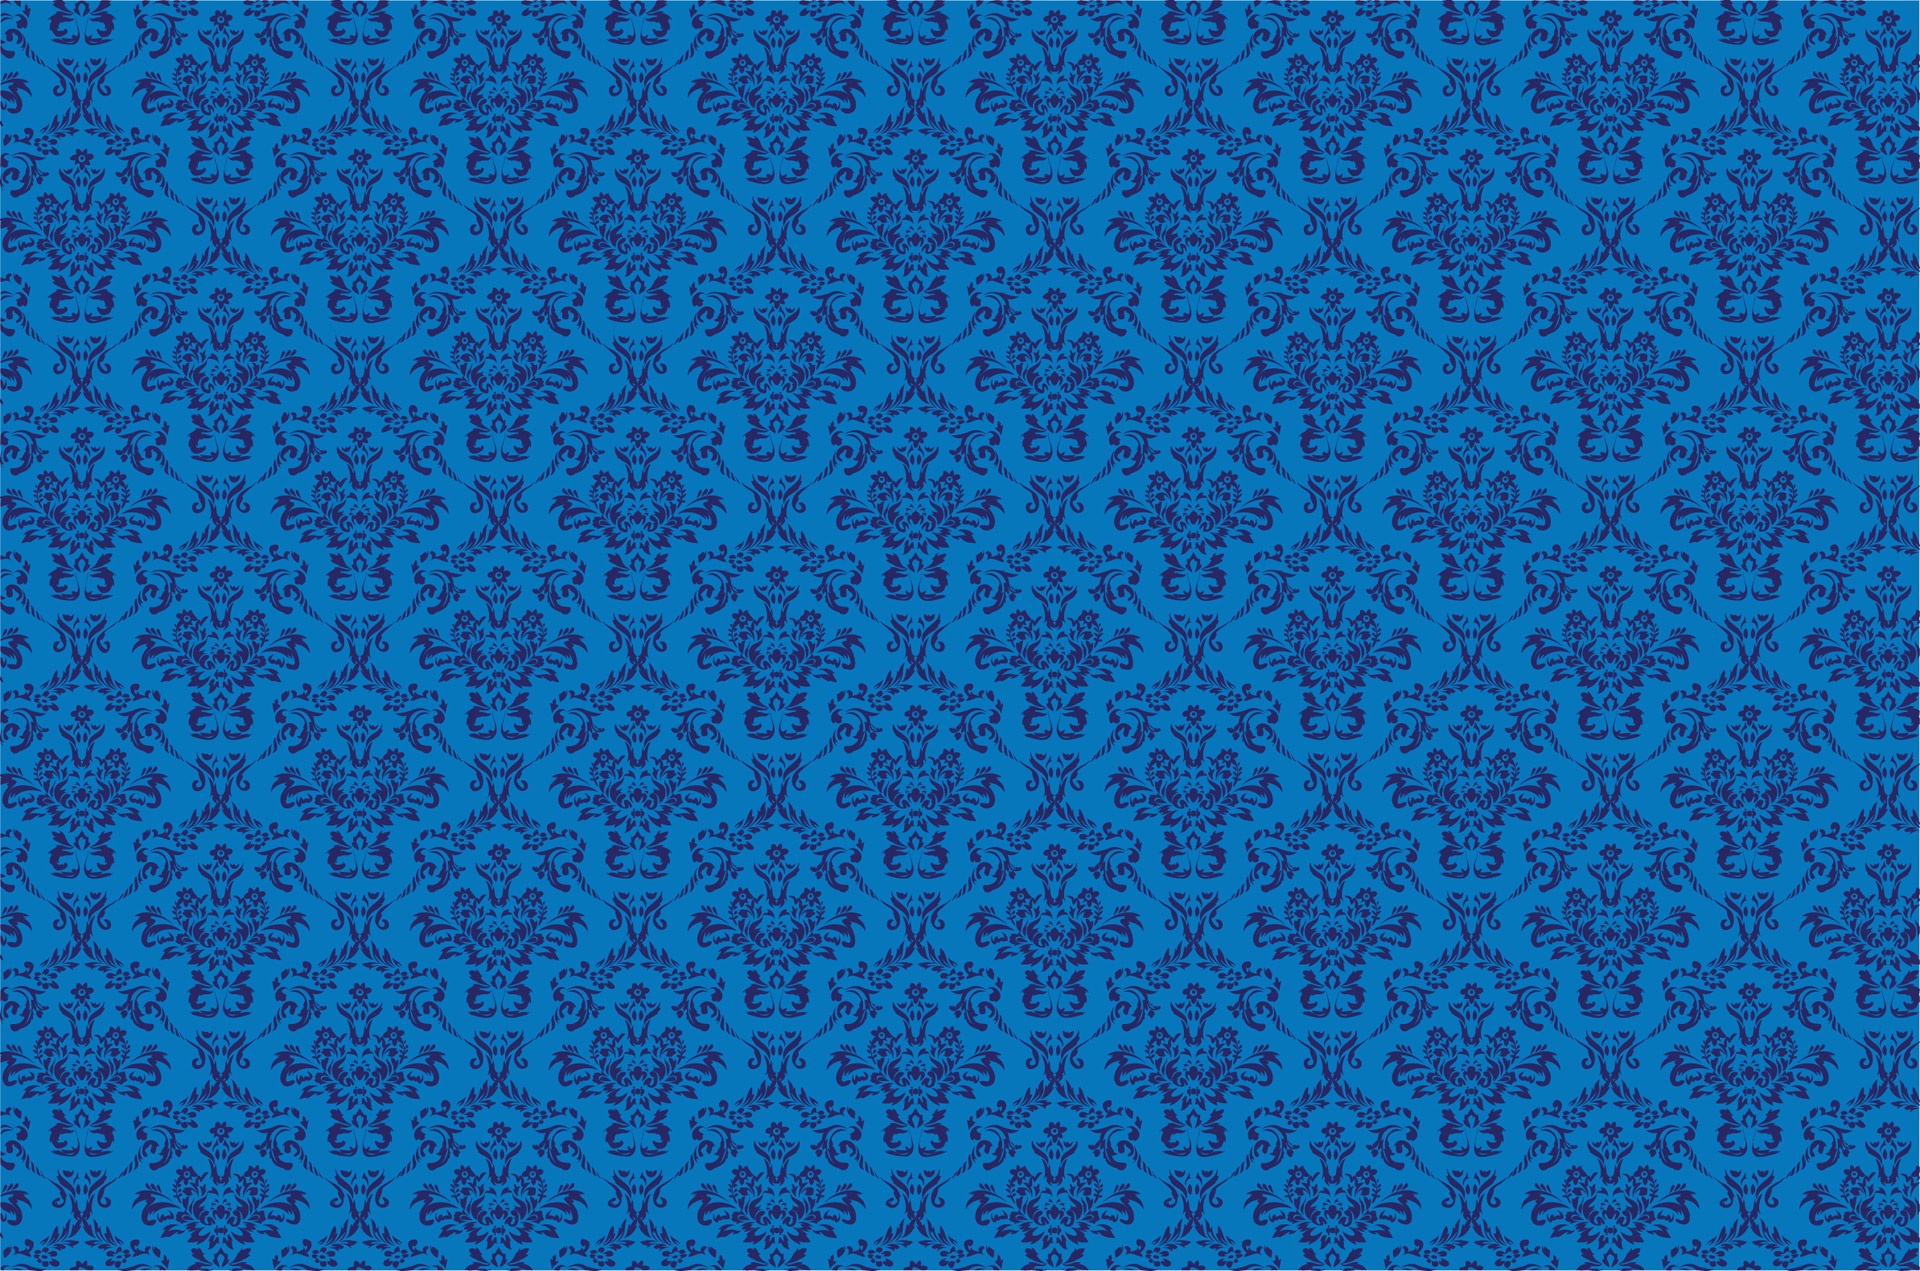 Download free photo of Damask,pattern,wallpaper,blue,retro - from ...